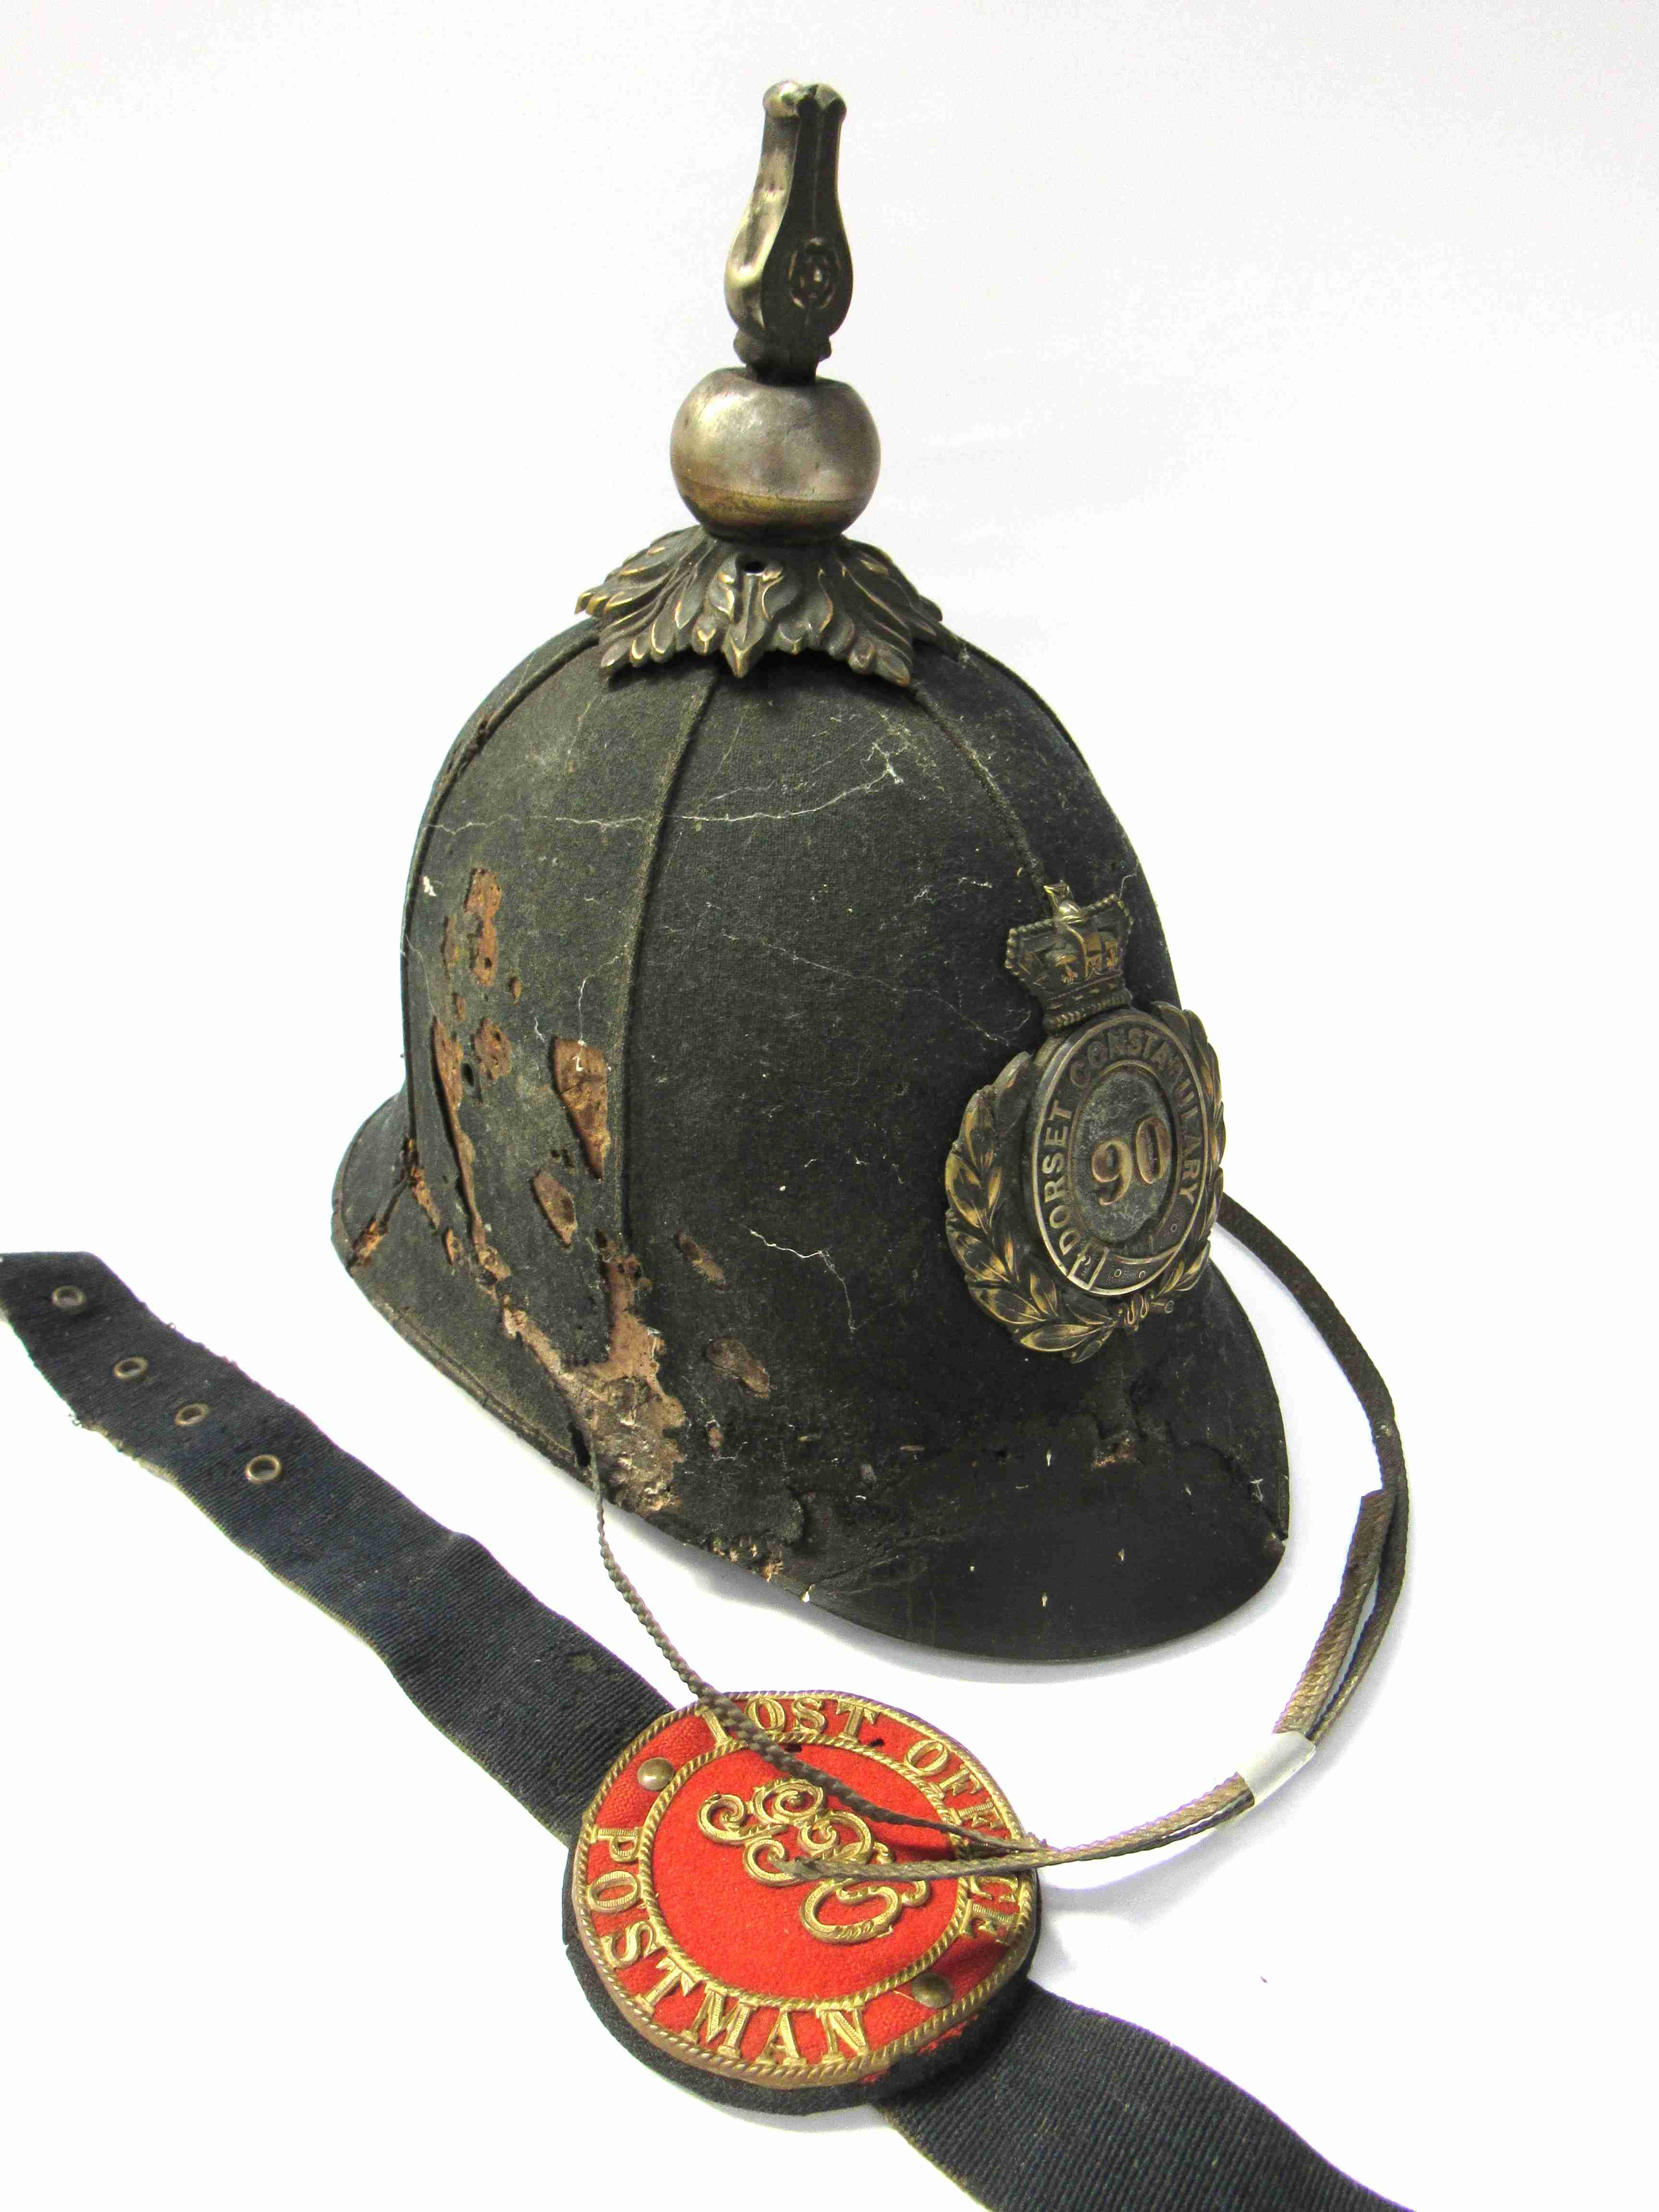 A 19th / early 20th Century police helmet for the Dorset Constabulary, very poor condition, - Image 2 of 4